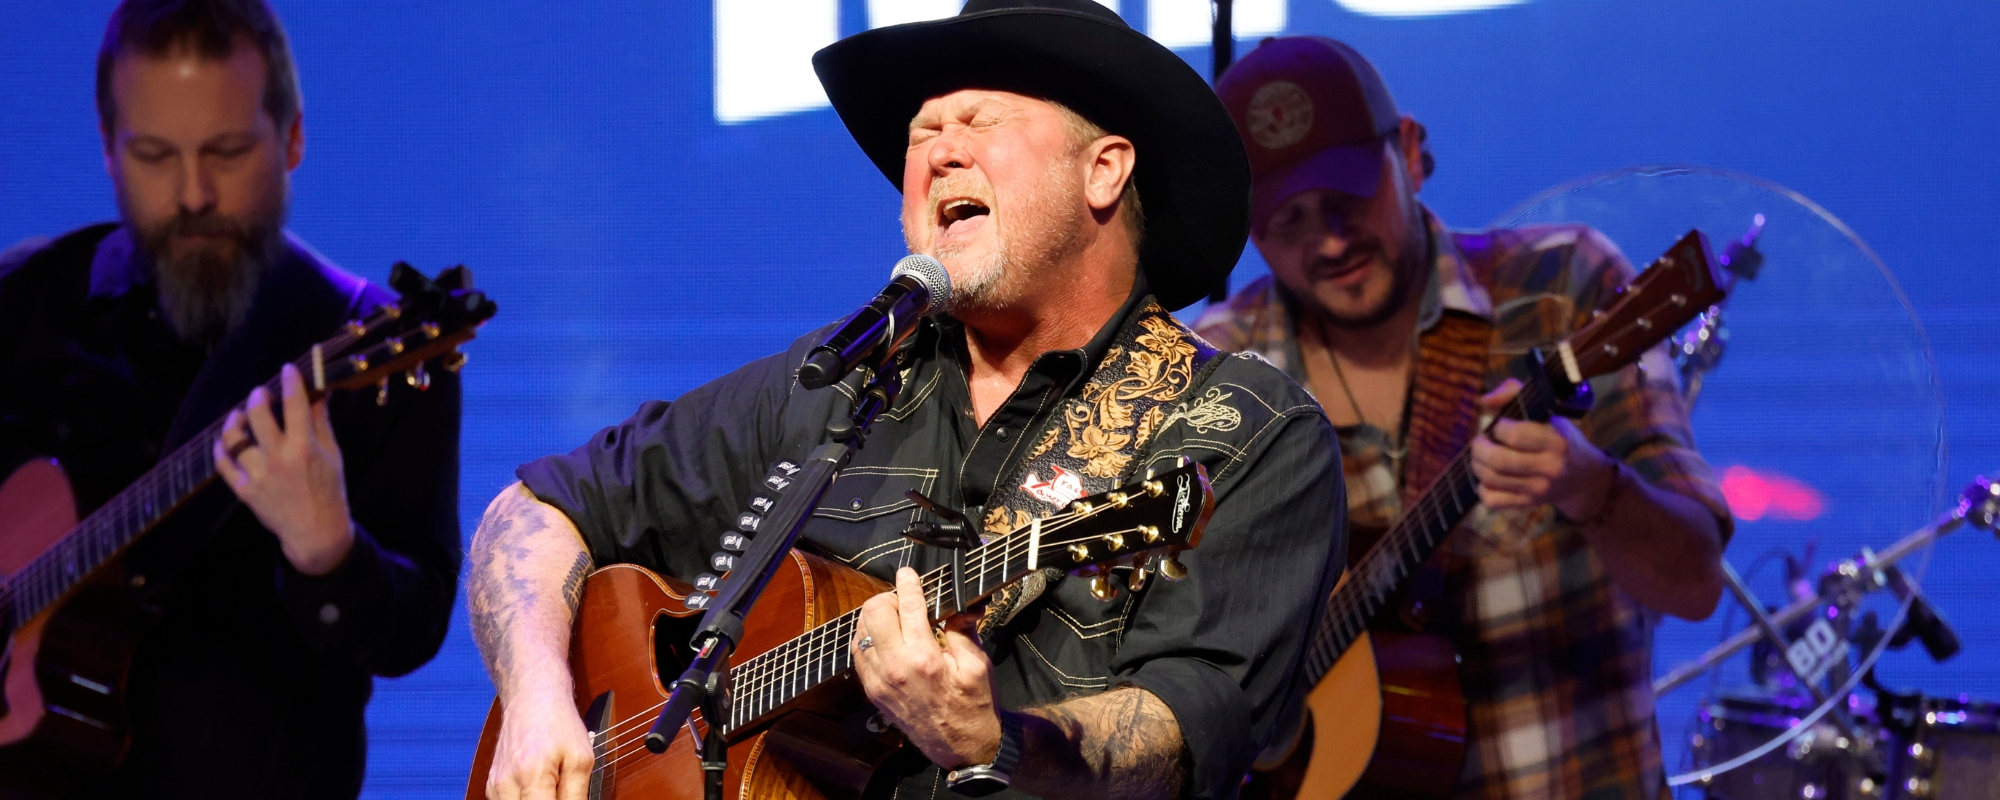 Tracy Lawrence Gives Back: Raises $250,000 and 10,000 Thanksgiving Meals for the Hungry